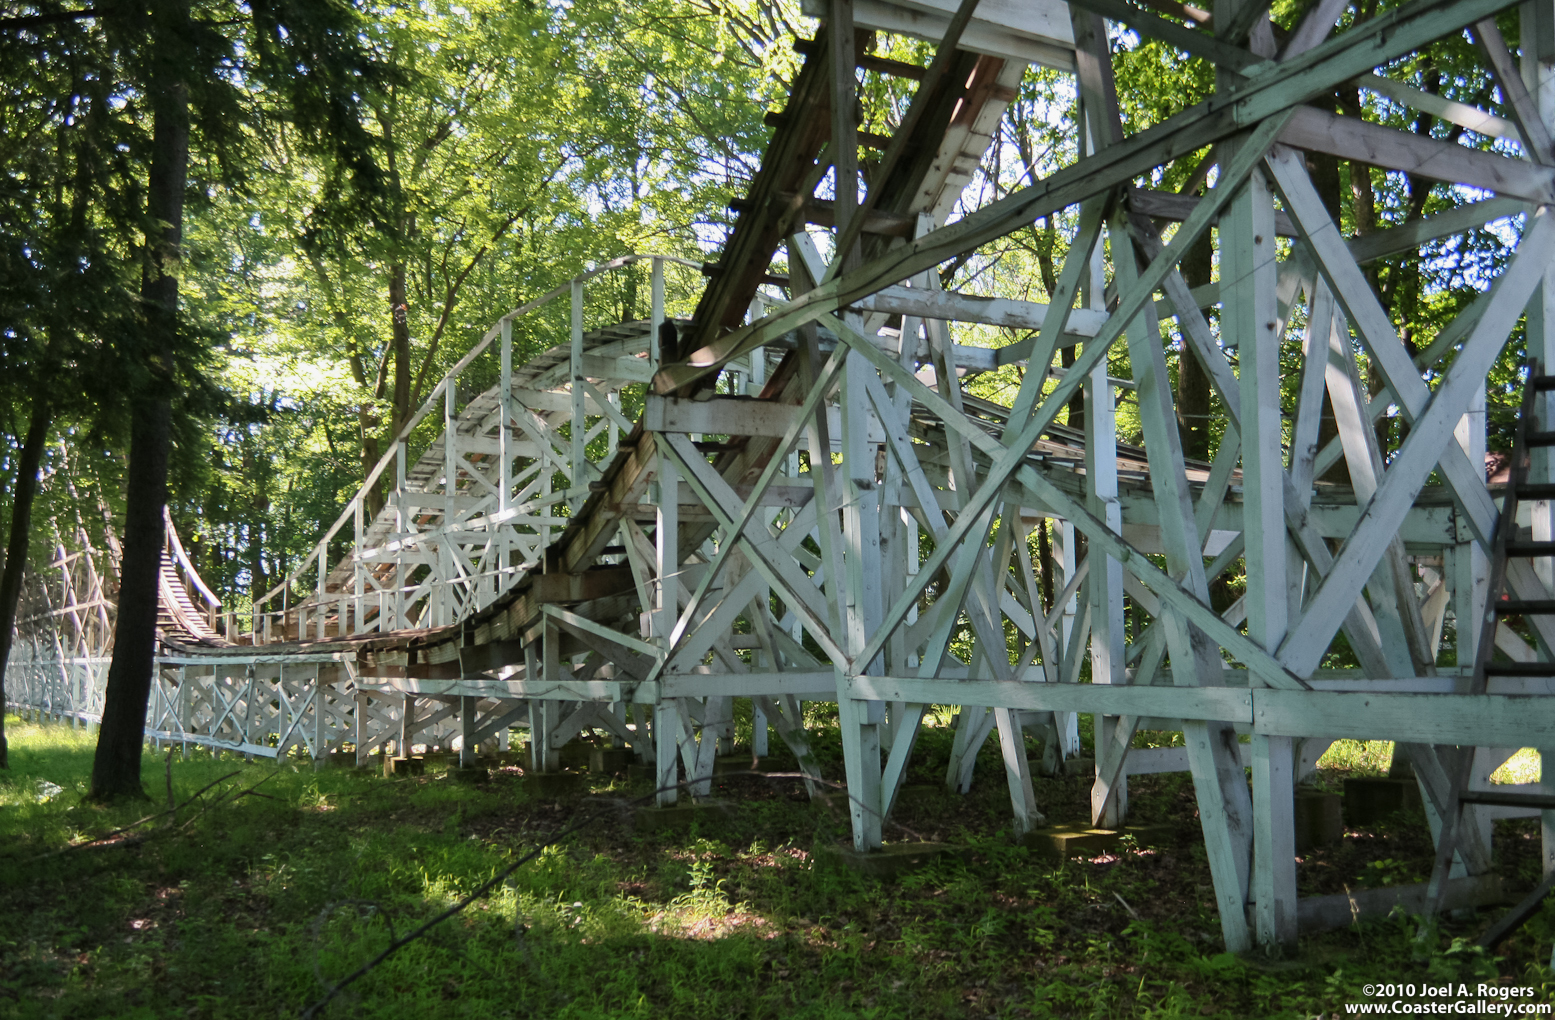 Wooden roller coaster painted blue